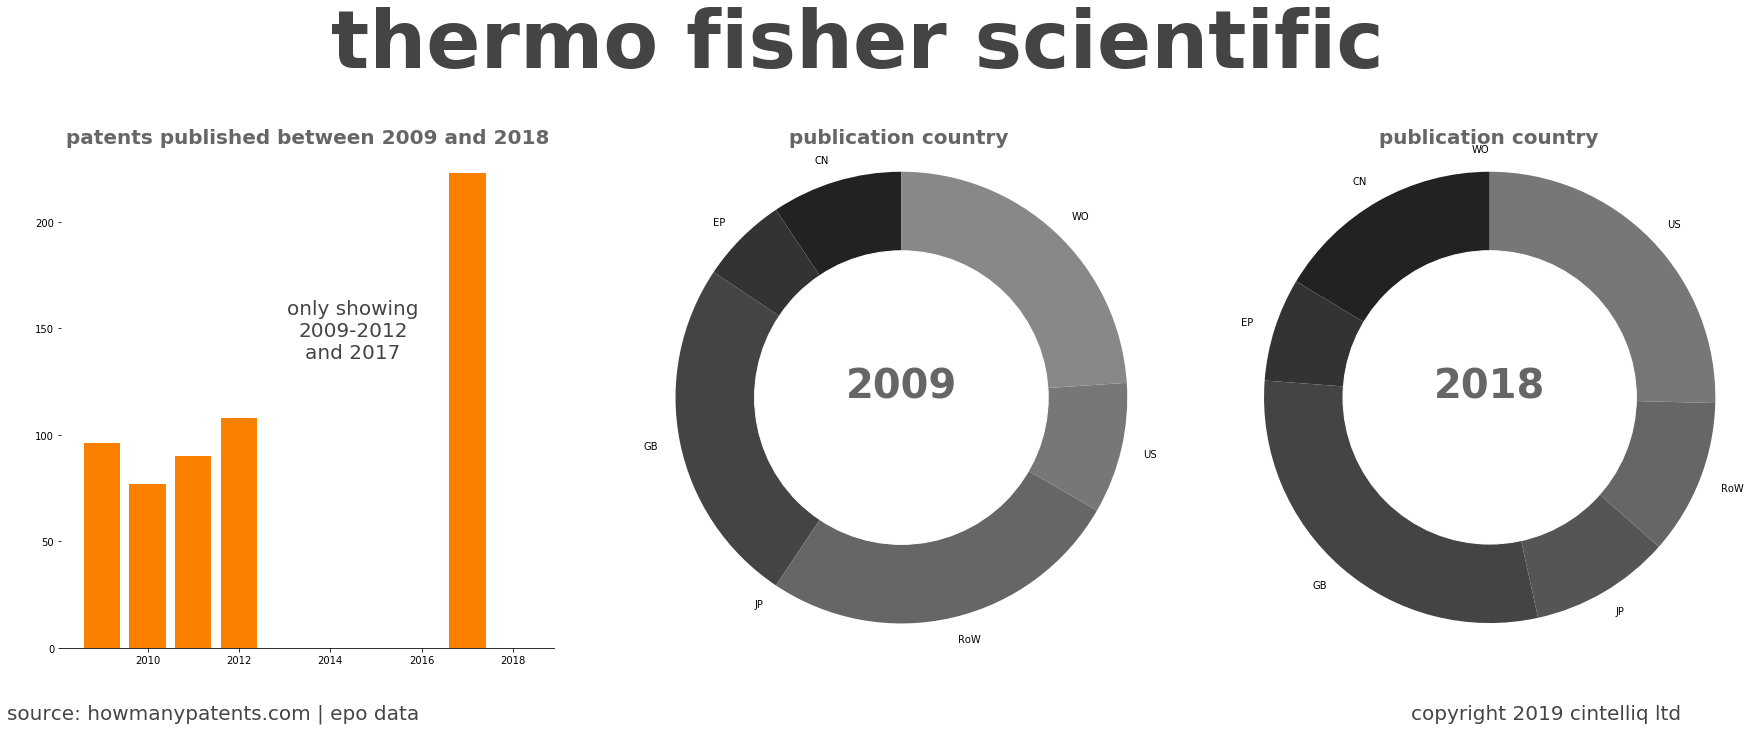 summary of patents for Thermo Fisher Scientific 